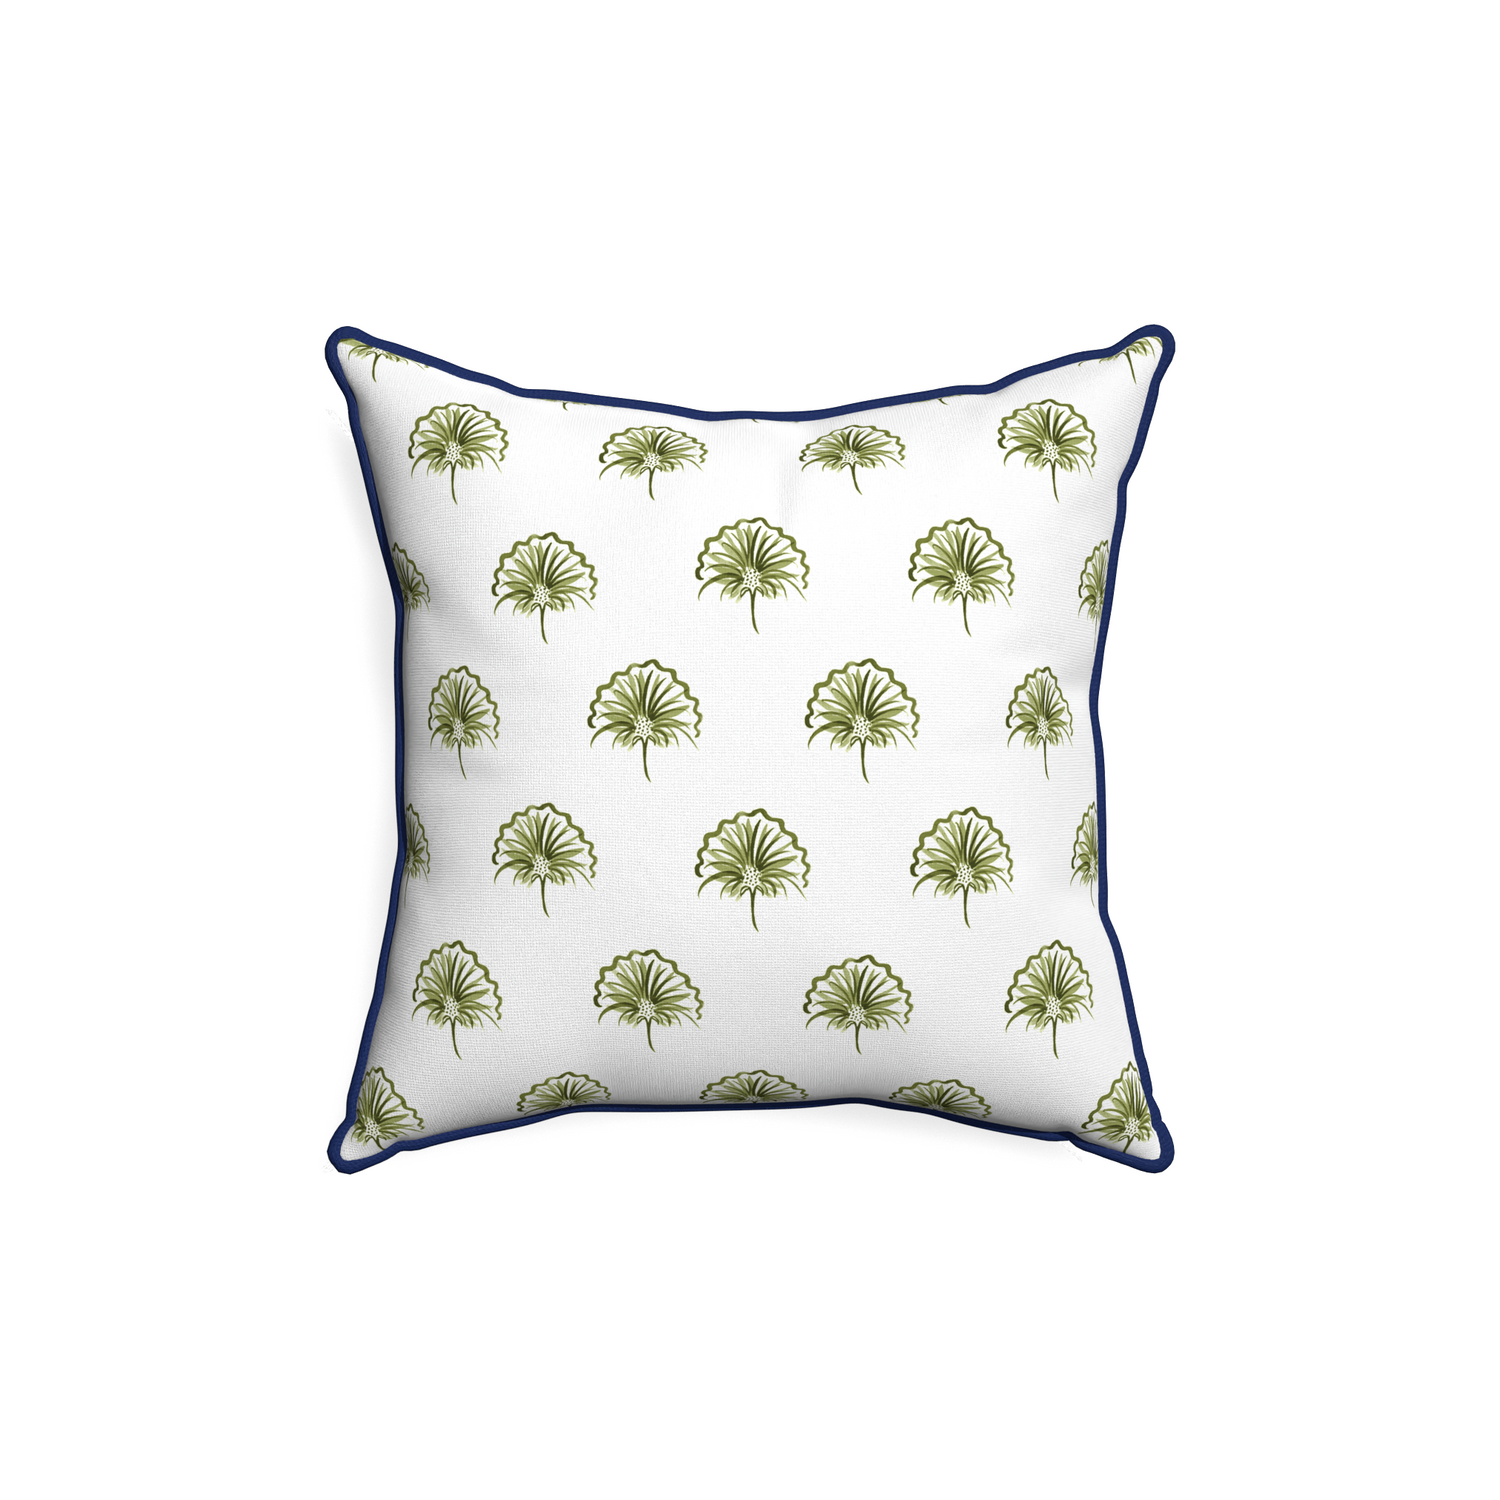 18-square penelope moss custom green floralpillow with midnight piping on white background